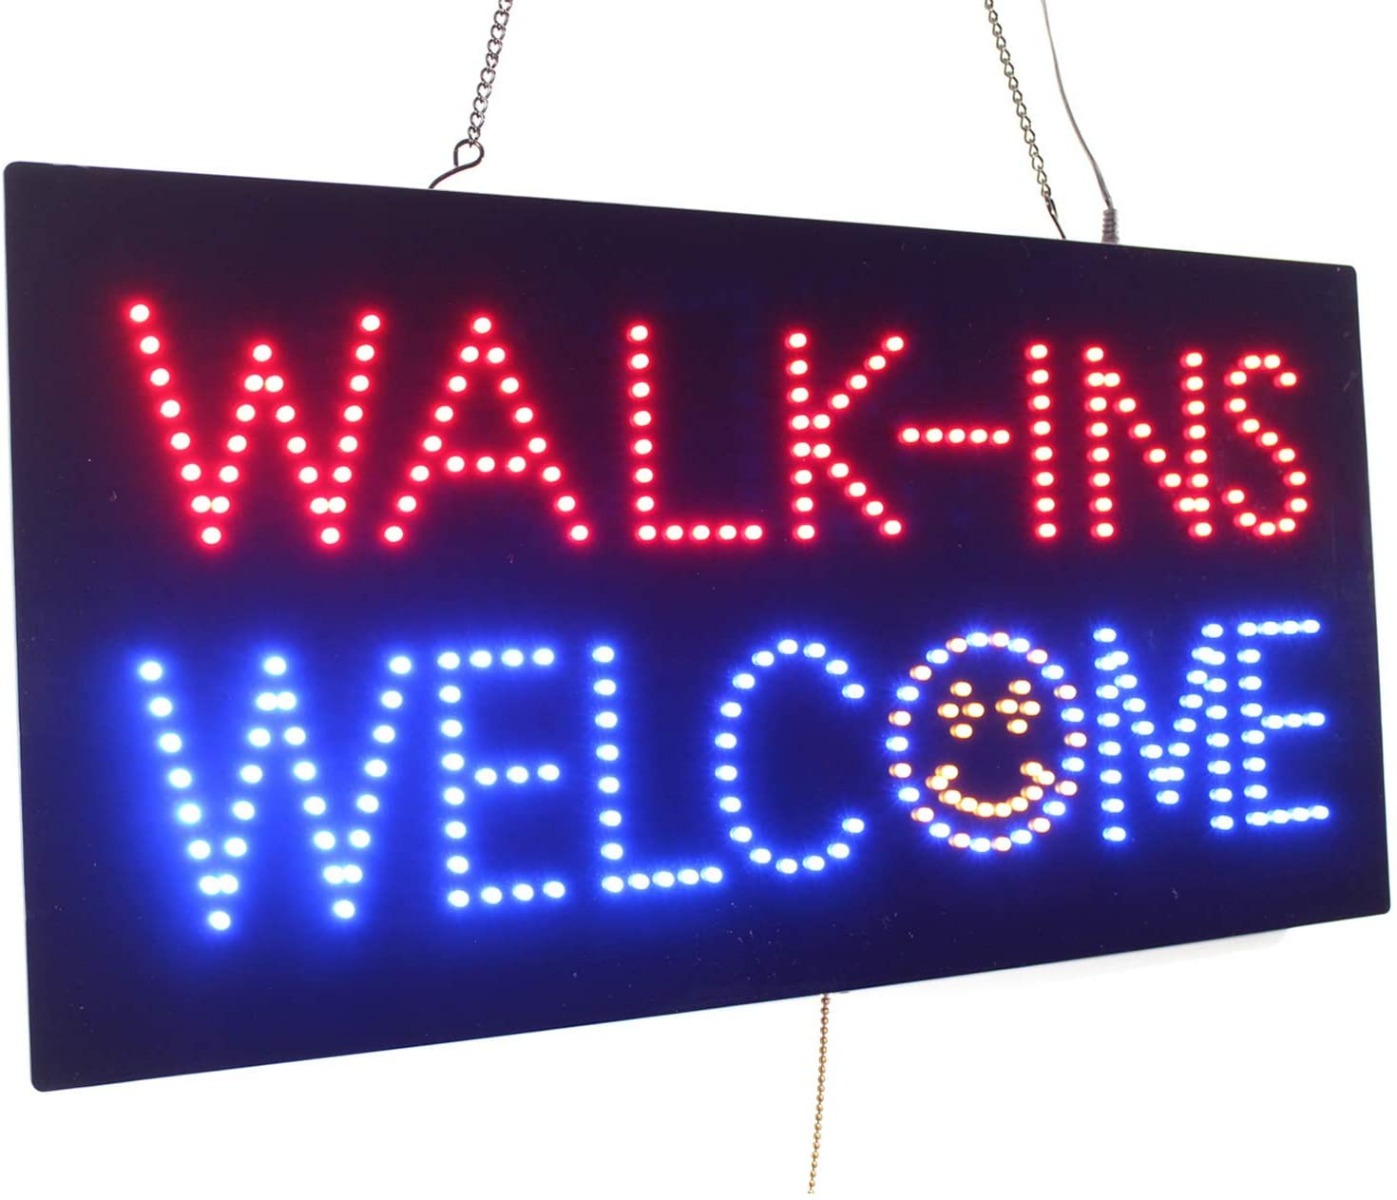 Walk-ins Welcome Sign, TOPKING Signage, LED Neon Open, Store, Window, Shop, Business, Display, Grand Opening Gift-0